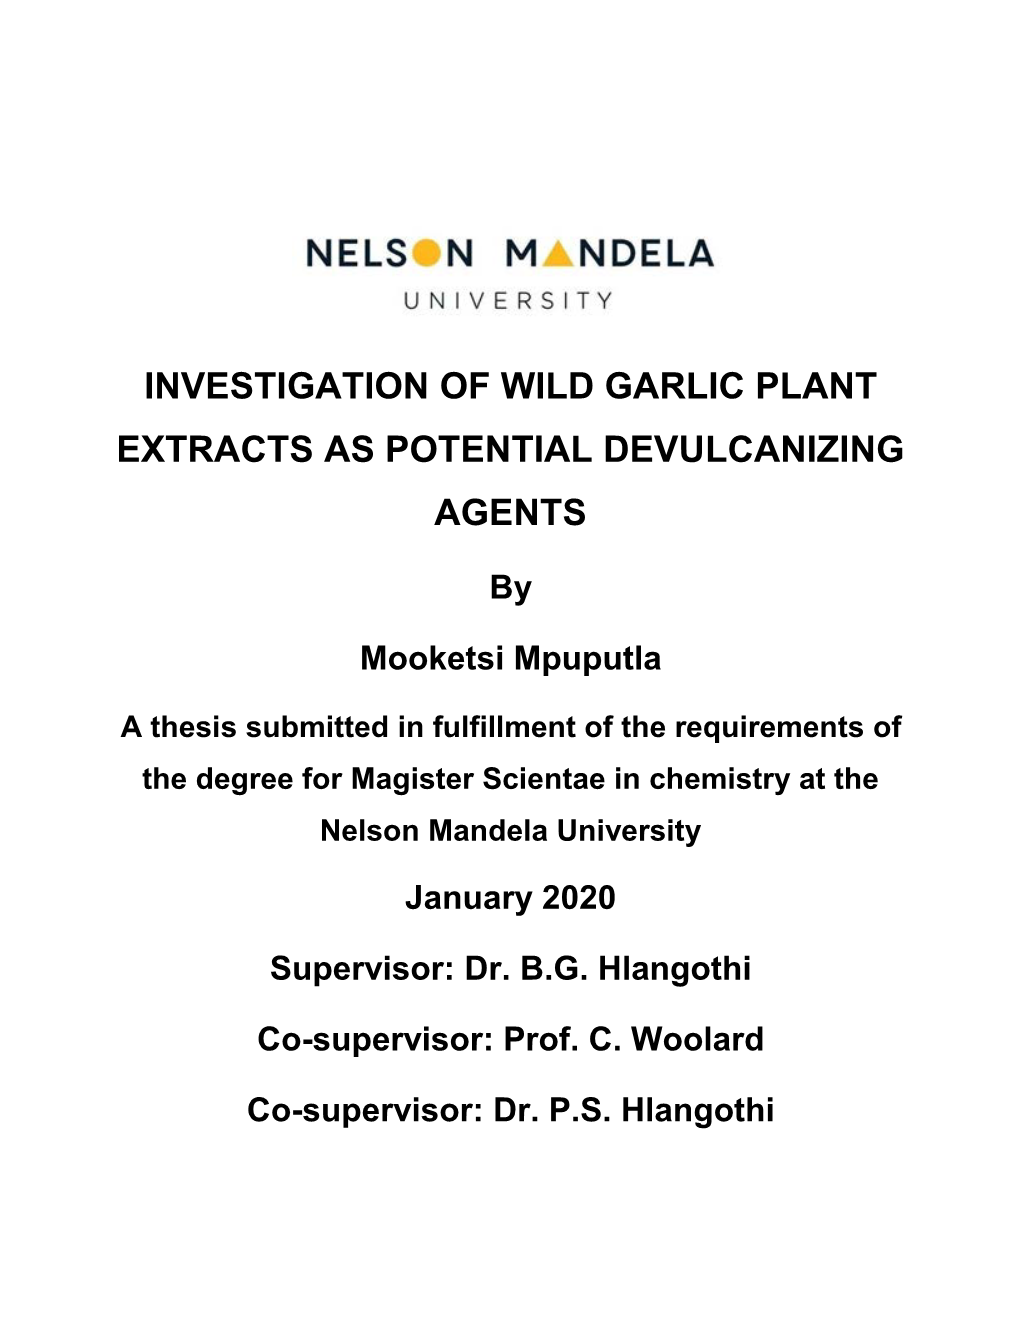 Investigation of Wild Garlic Plant Extracts As Potential Devulcanizing Agents